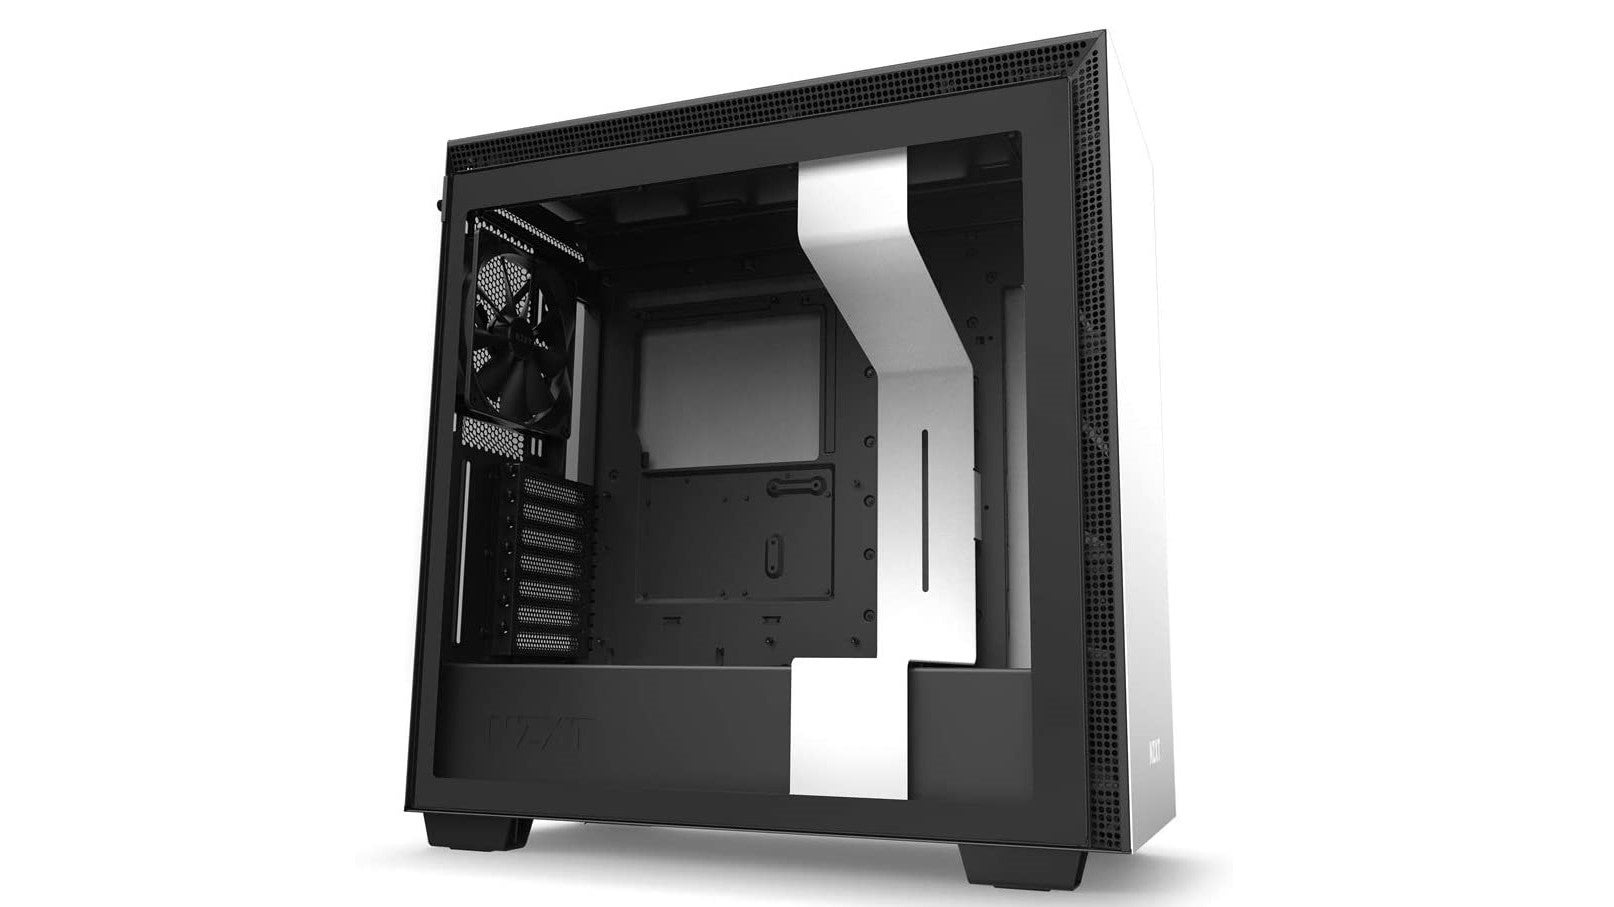 The white NZXT H710 against a white background.